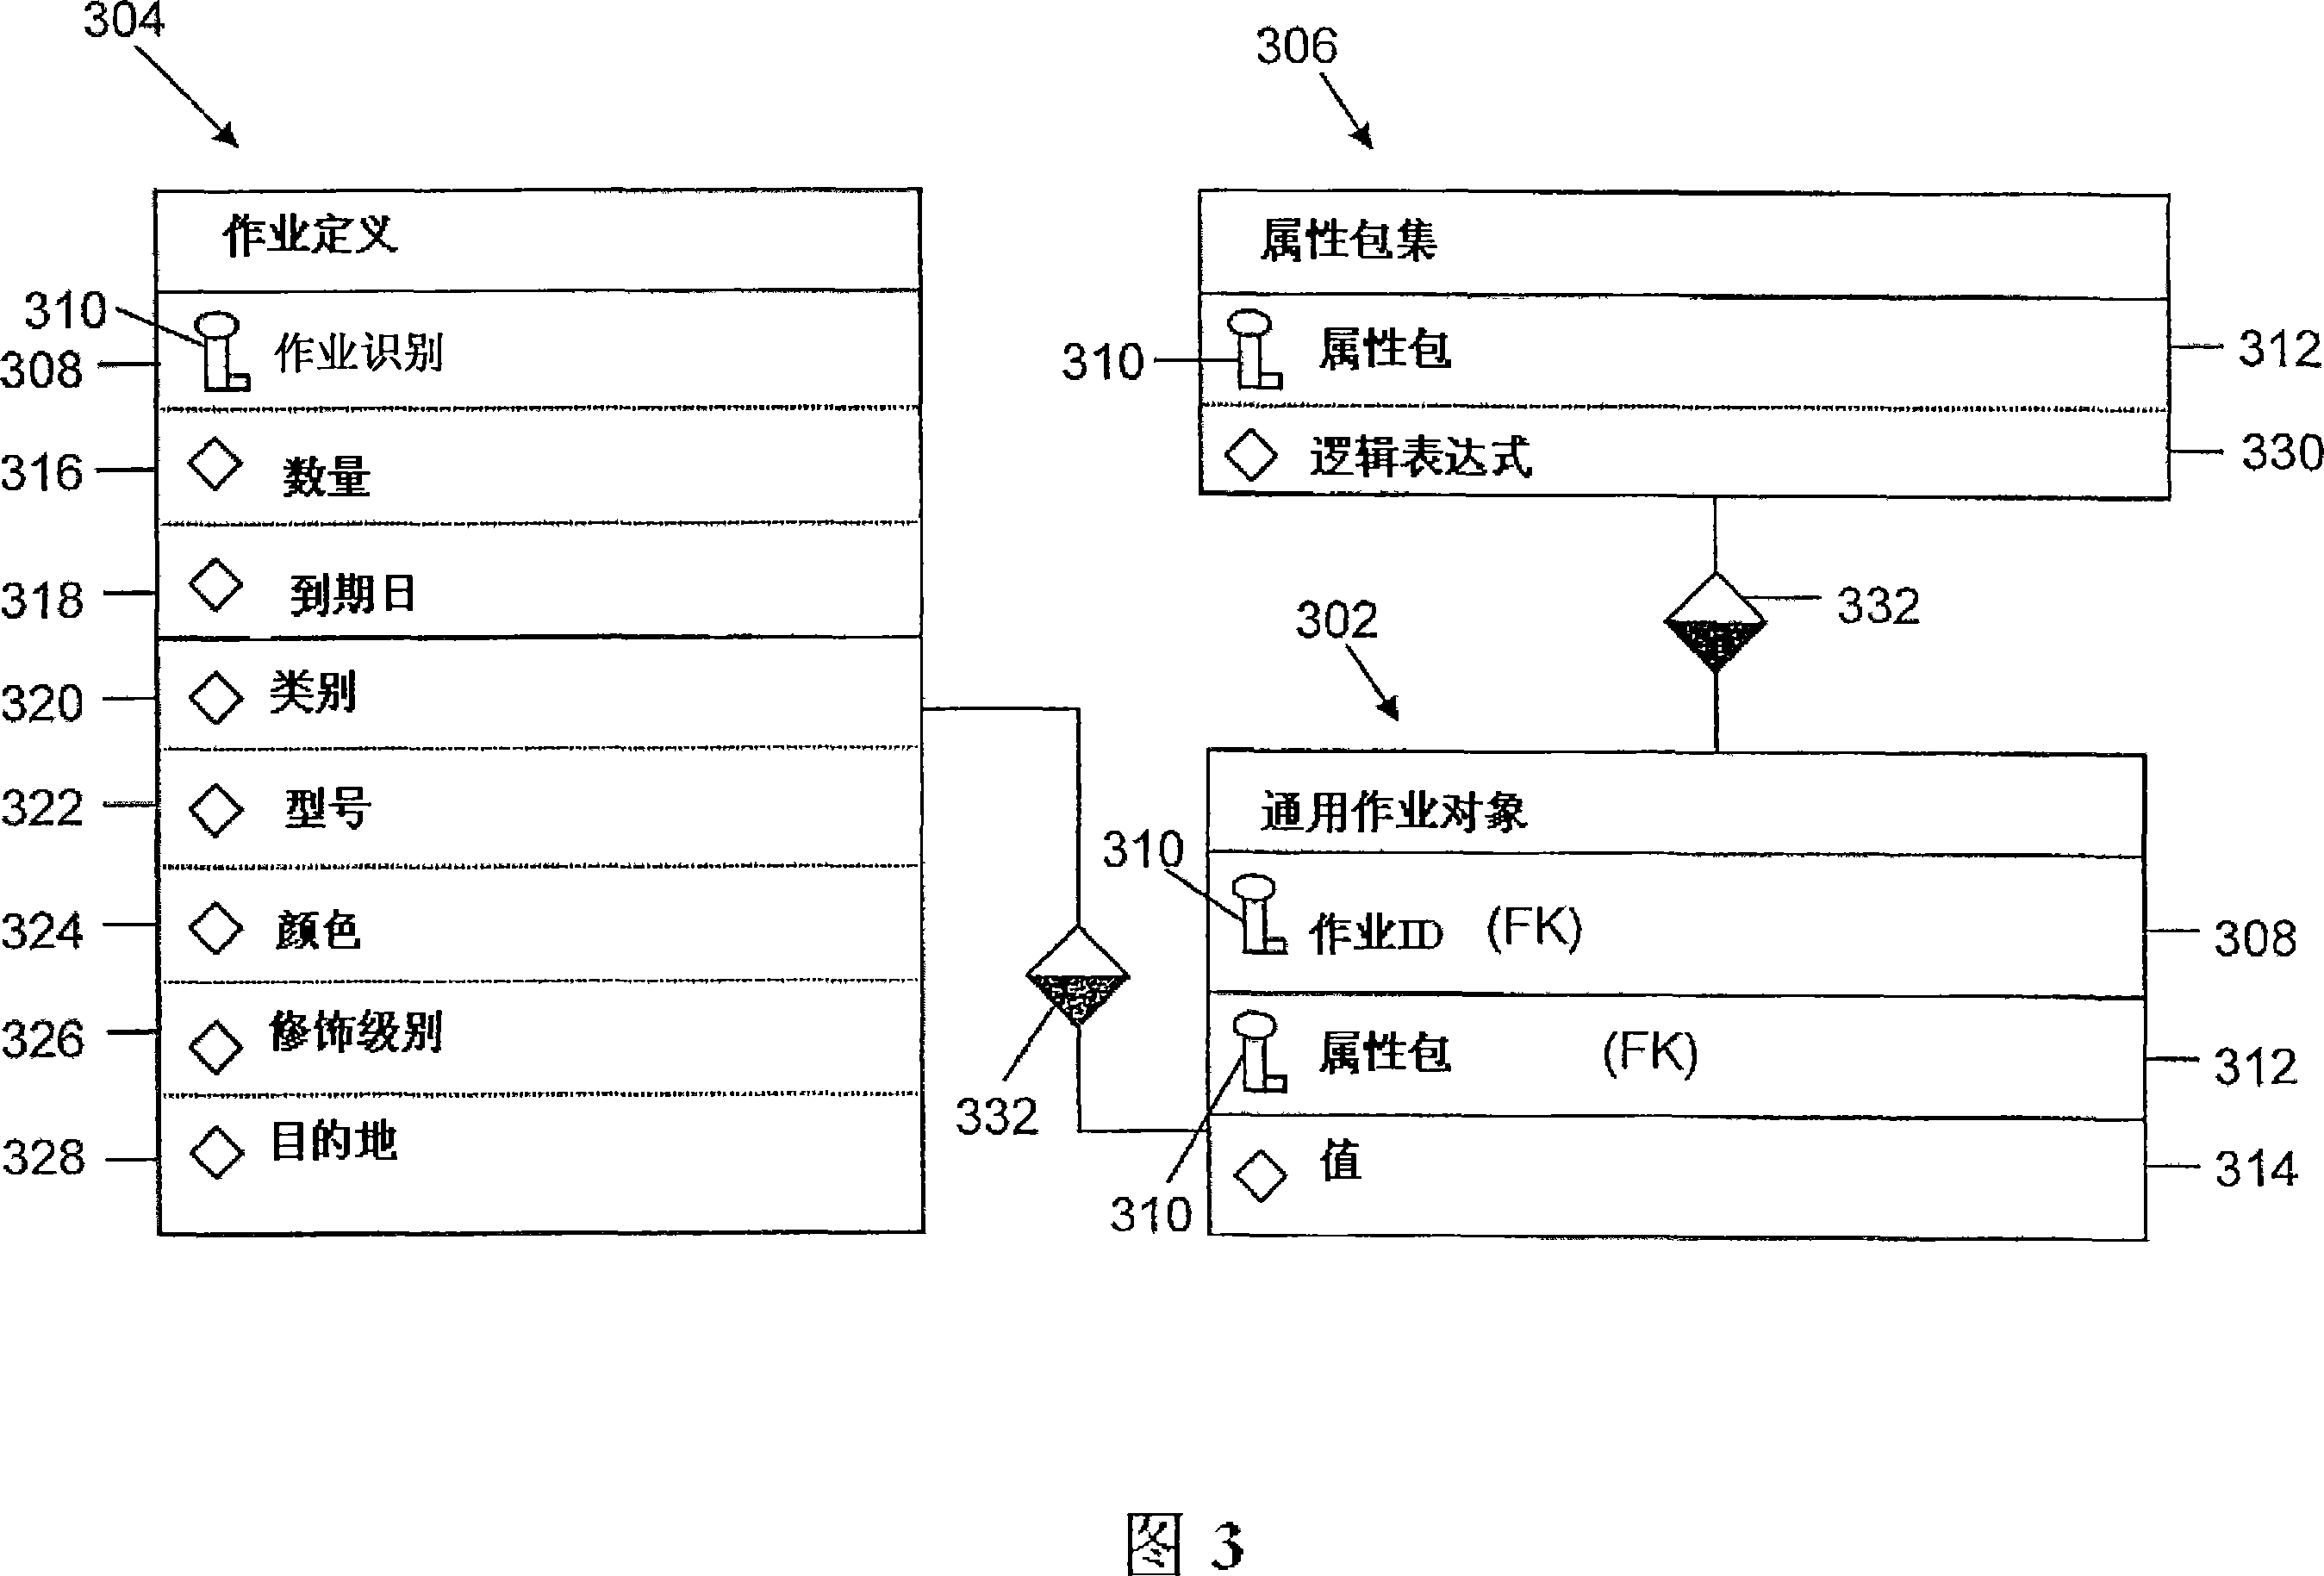 Method and system for sequencing and scheduling